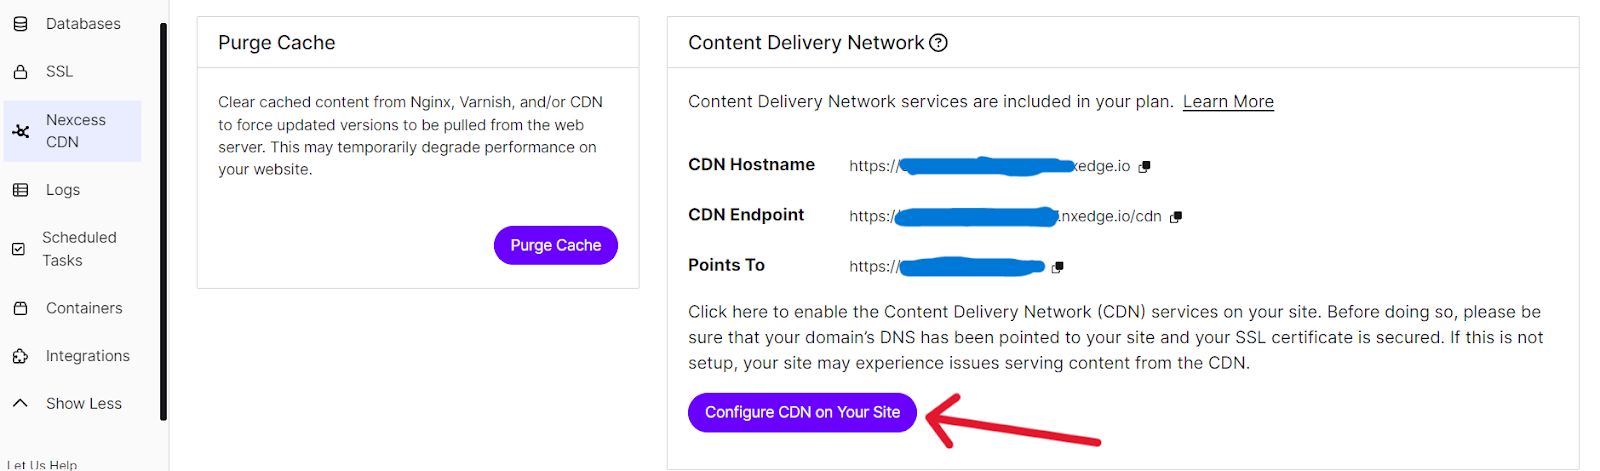 Button showing Configure CDN on Your Site.